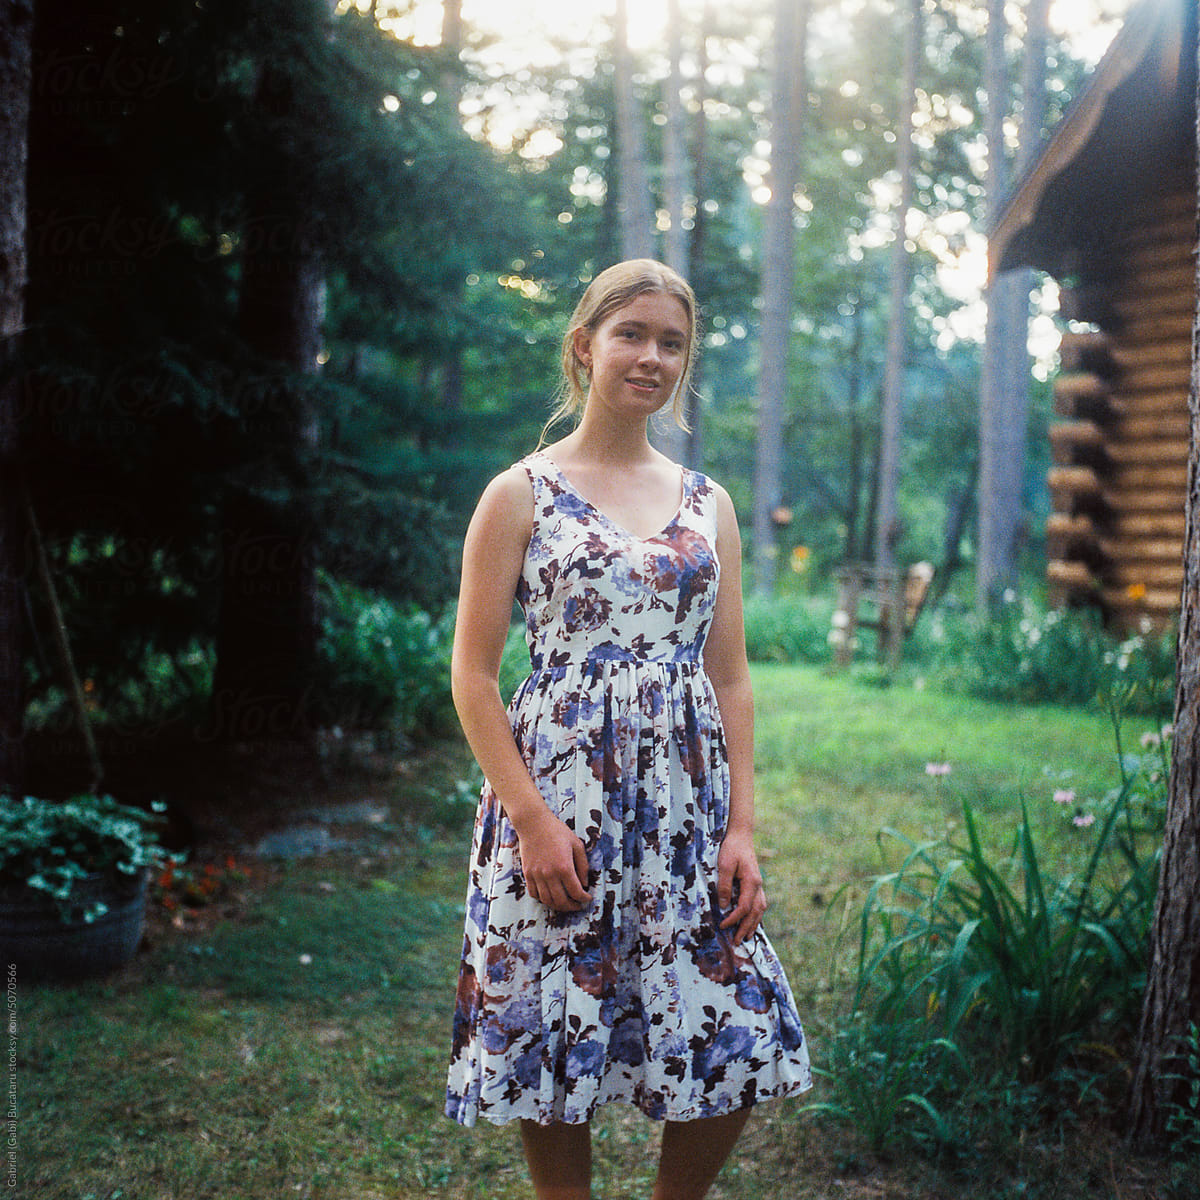 Smiling teen by a cabin